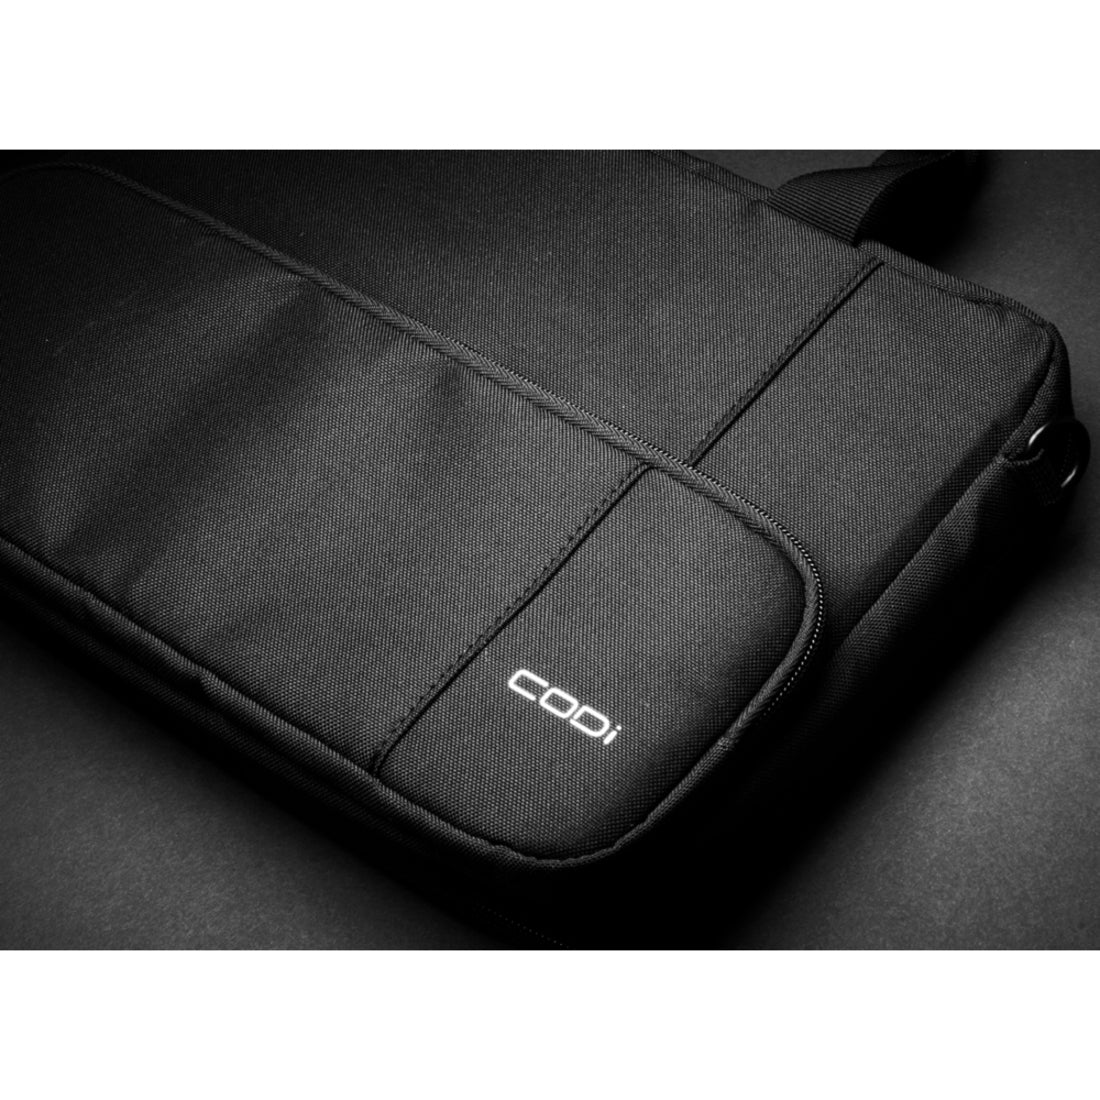 CODi AWO116-4 Alunno Always-On 11.6" Chromebook Case, Durable and Water-Resistant, Black